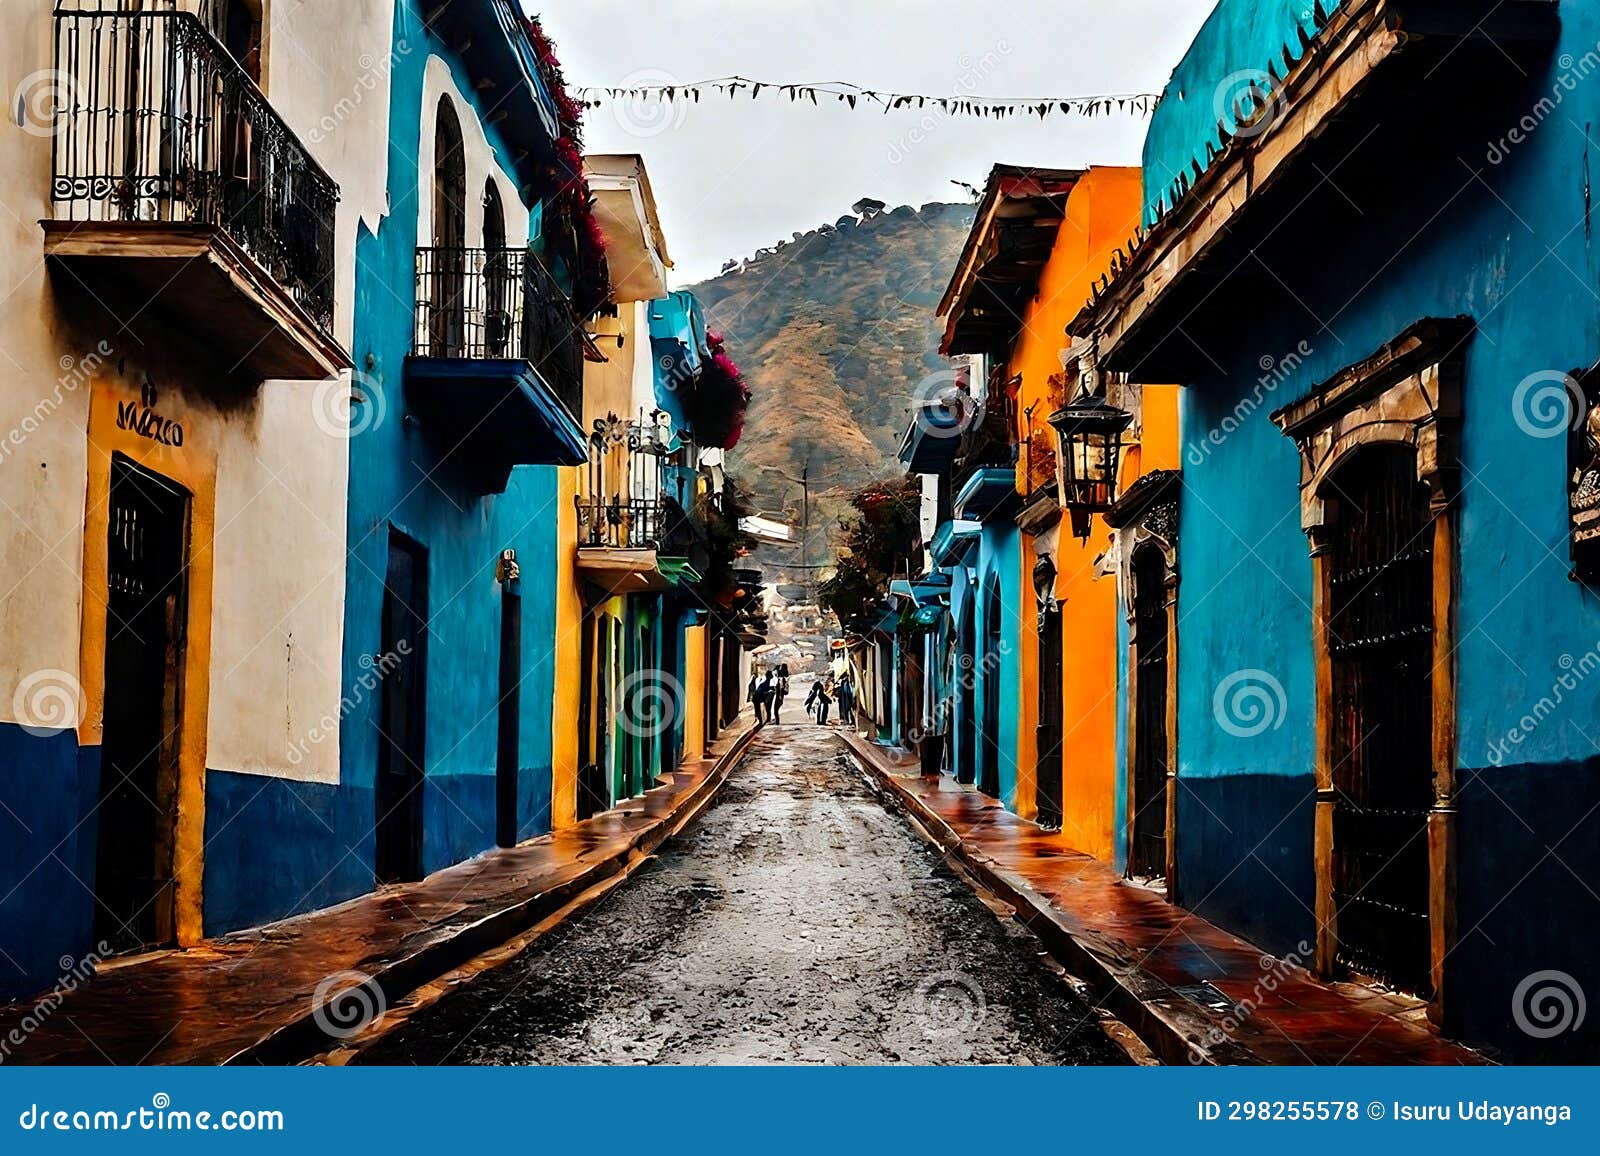 san jose del pacifico streets. cinematic photograph of an old mexican city